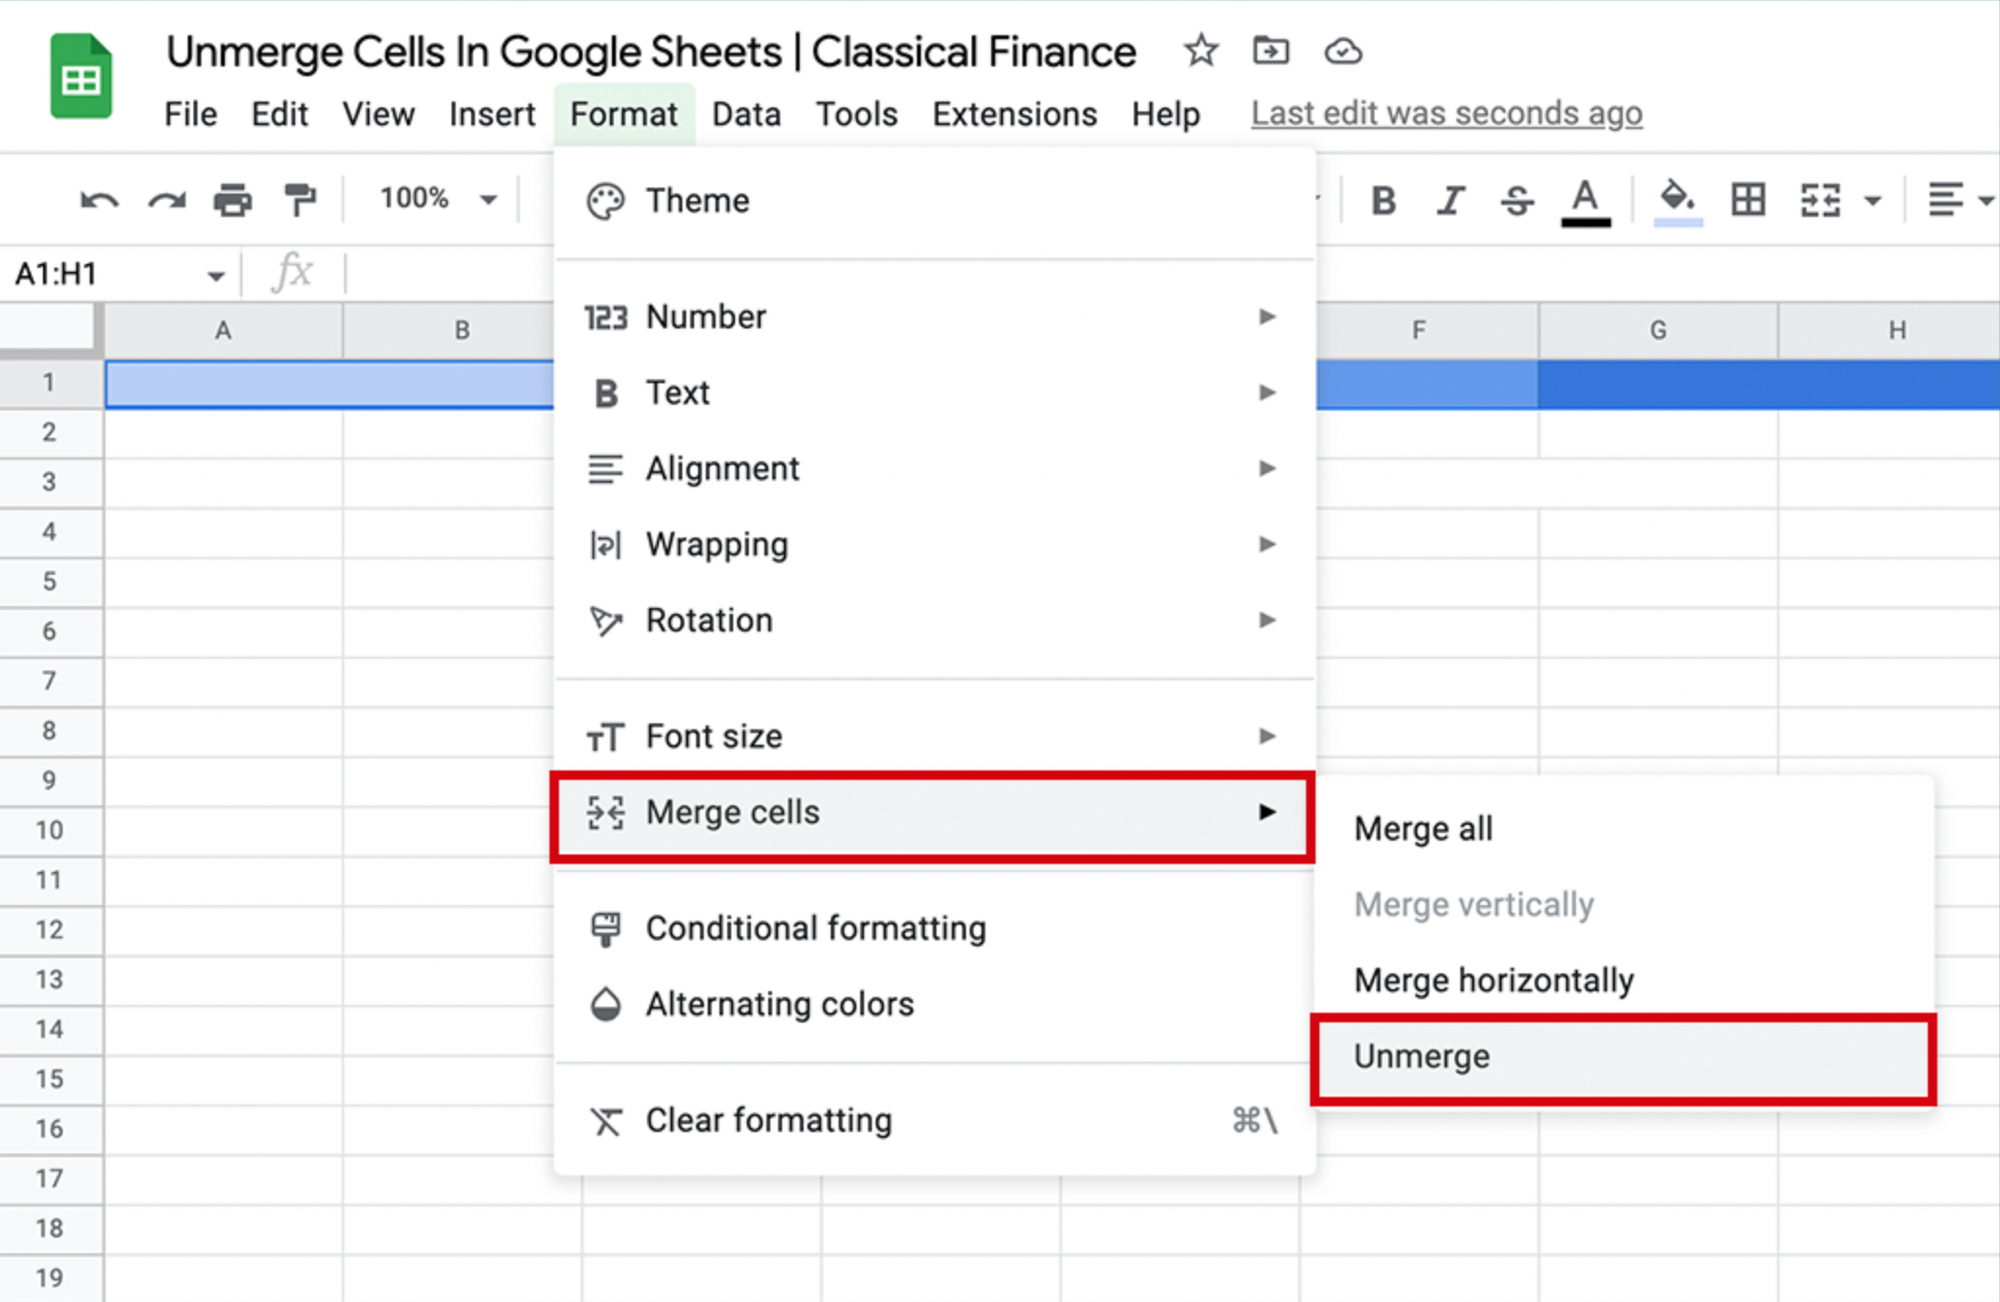 Unmerge Cells in google sheets